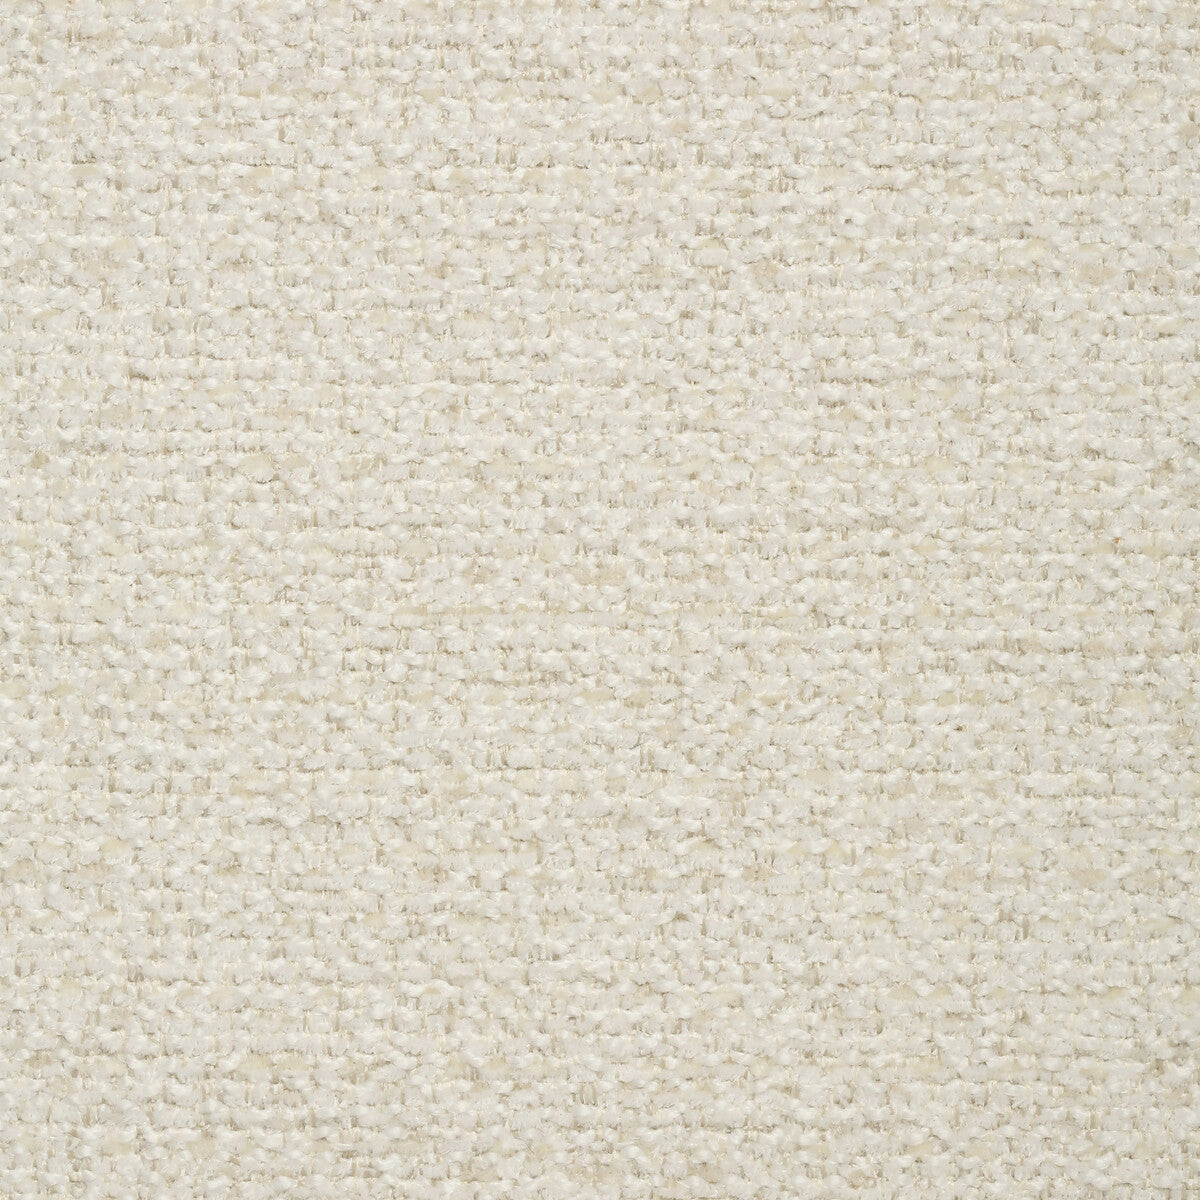 Kravet Contract fabric in 35118-111 color - pattern 35118.111.0 - by Kravet Contract in the Crypton Incase collection